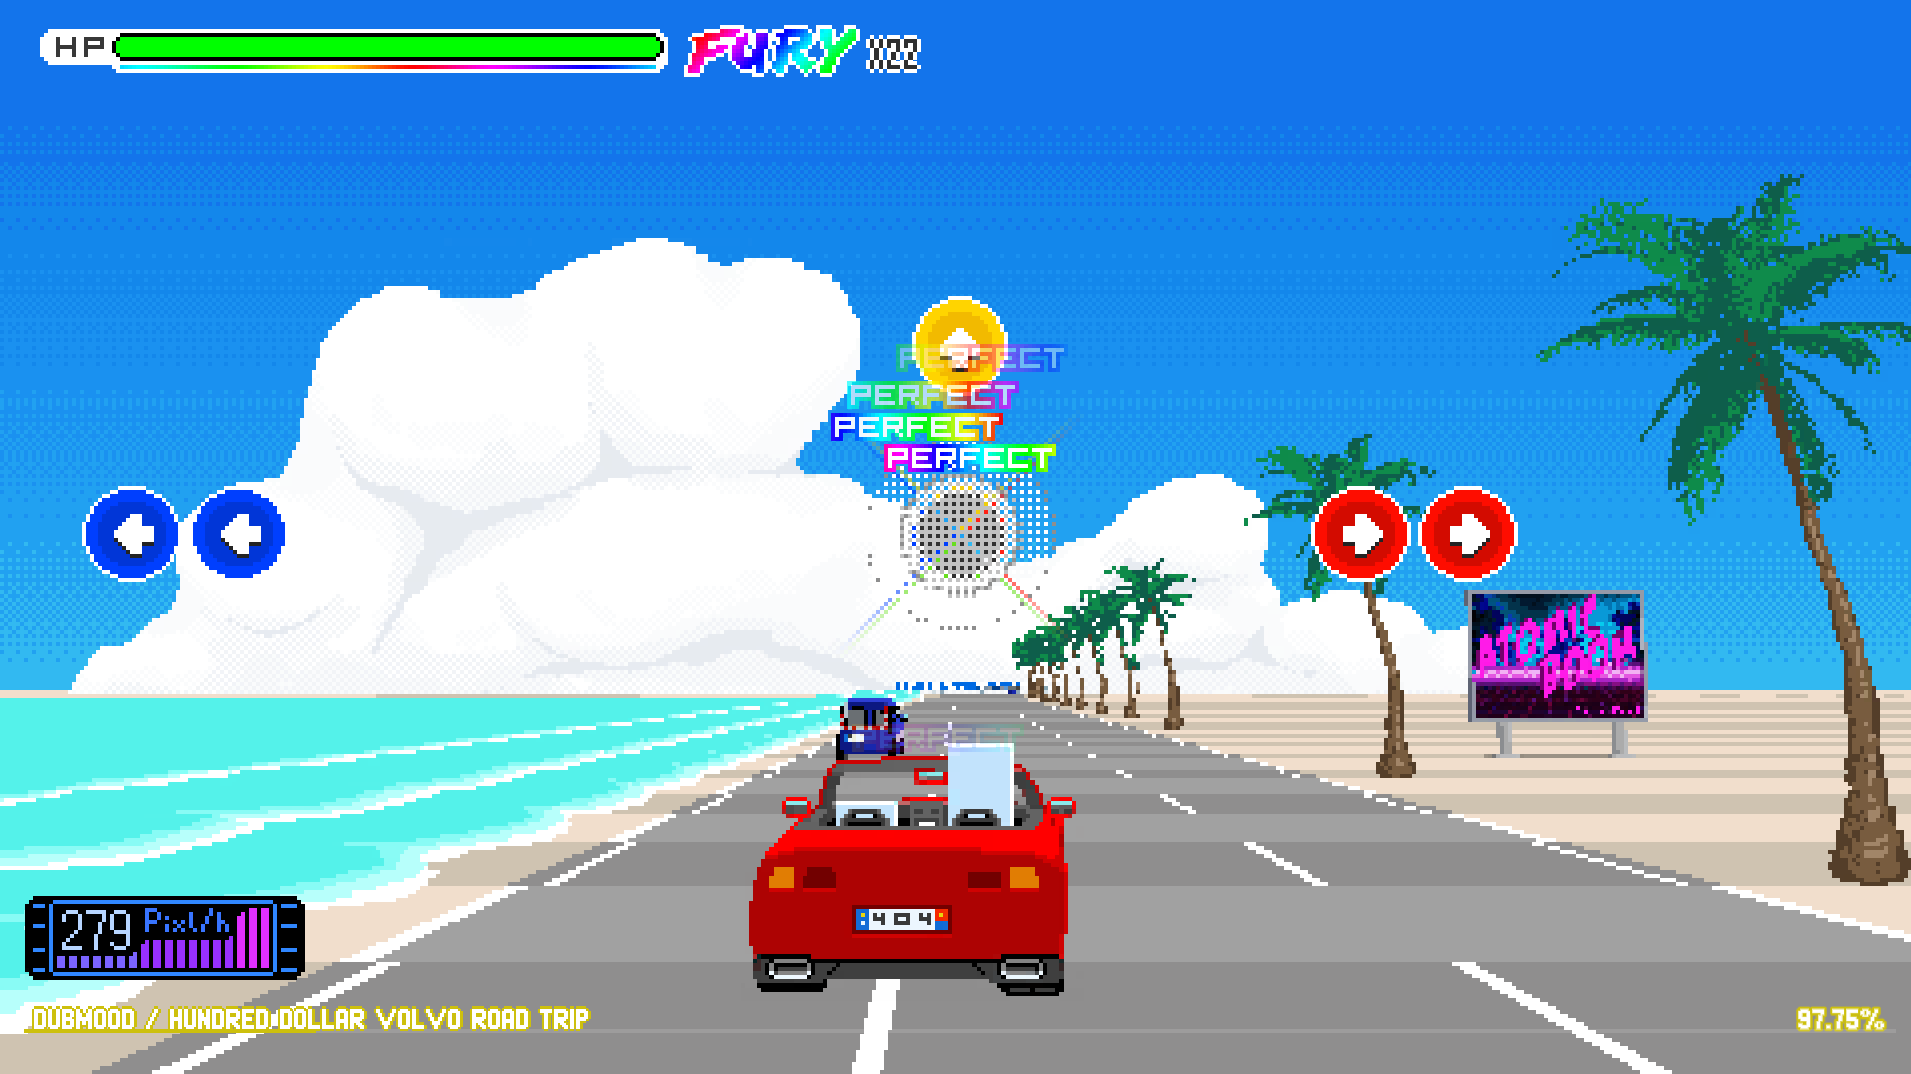 Colored circles with white arrows in them, over a beach scene with a red convertible driving down a road.